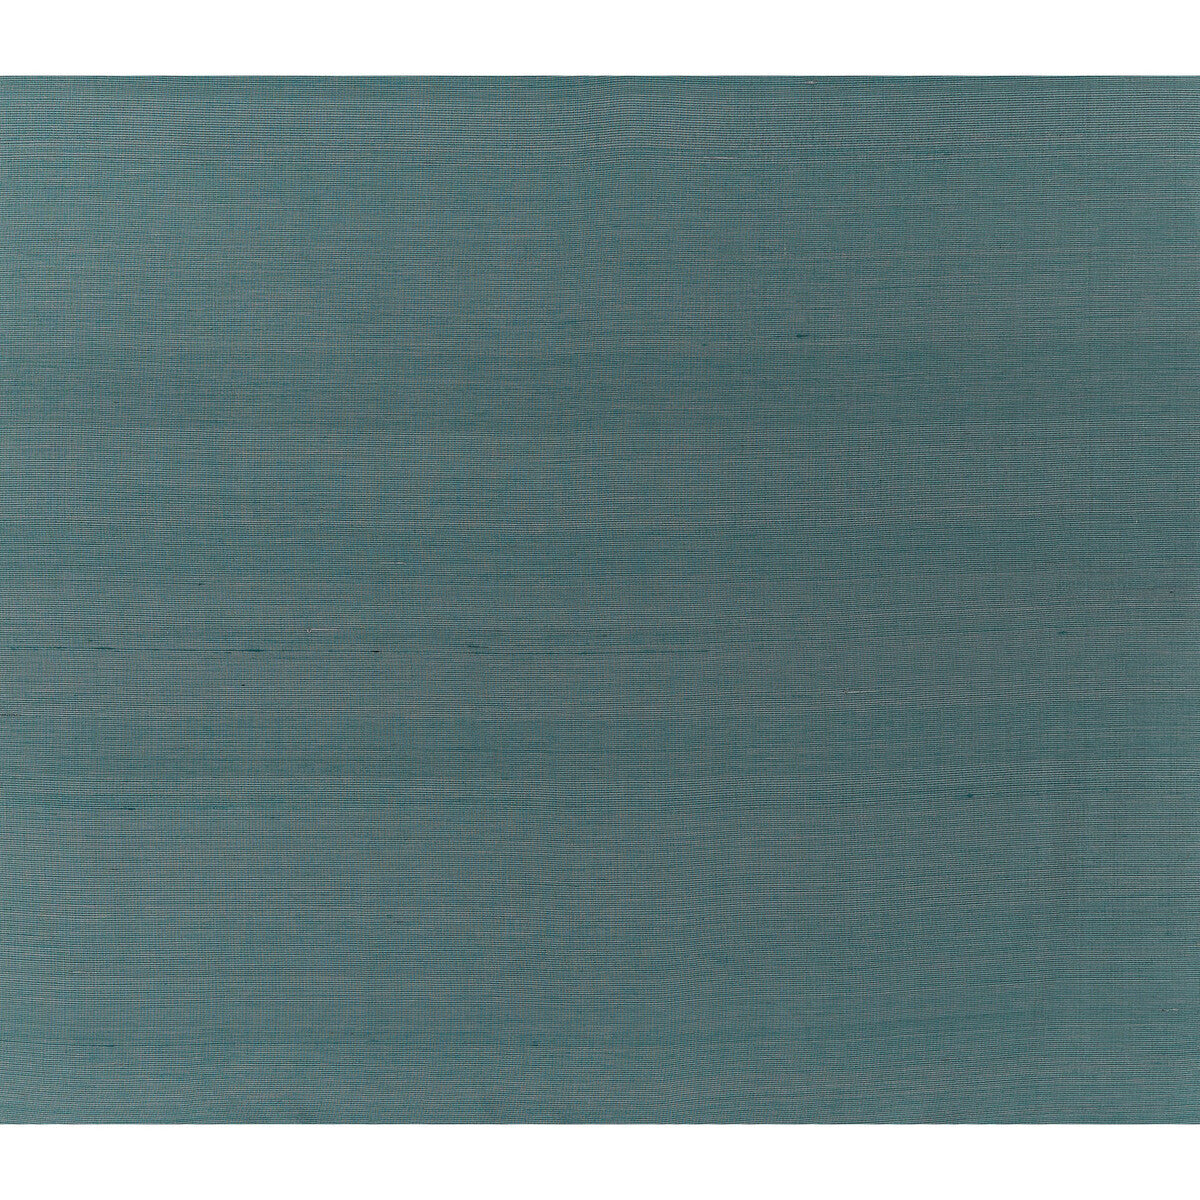 Silk Twist fabric in aqua pura color - pattern JAG-50052.13.0 - by Brunschwig &amp; Fils in the Jagtar collection